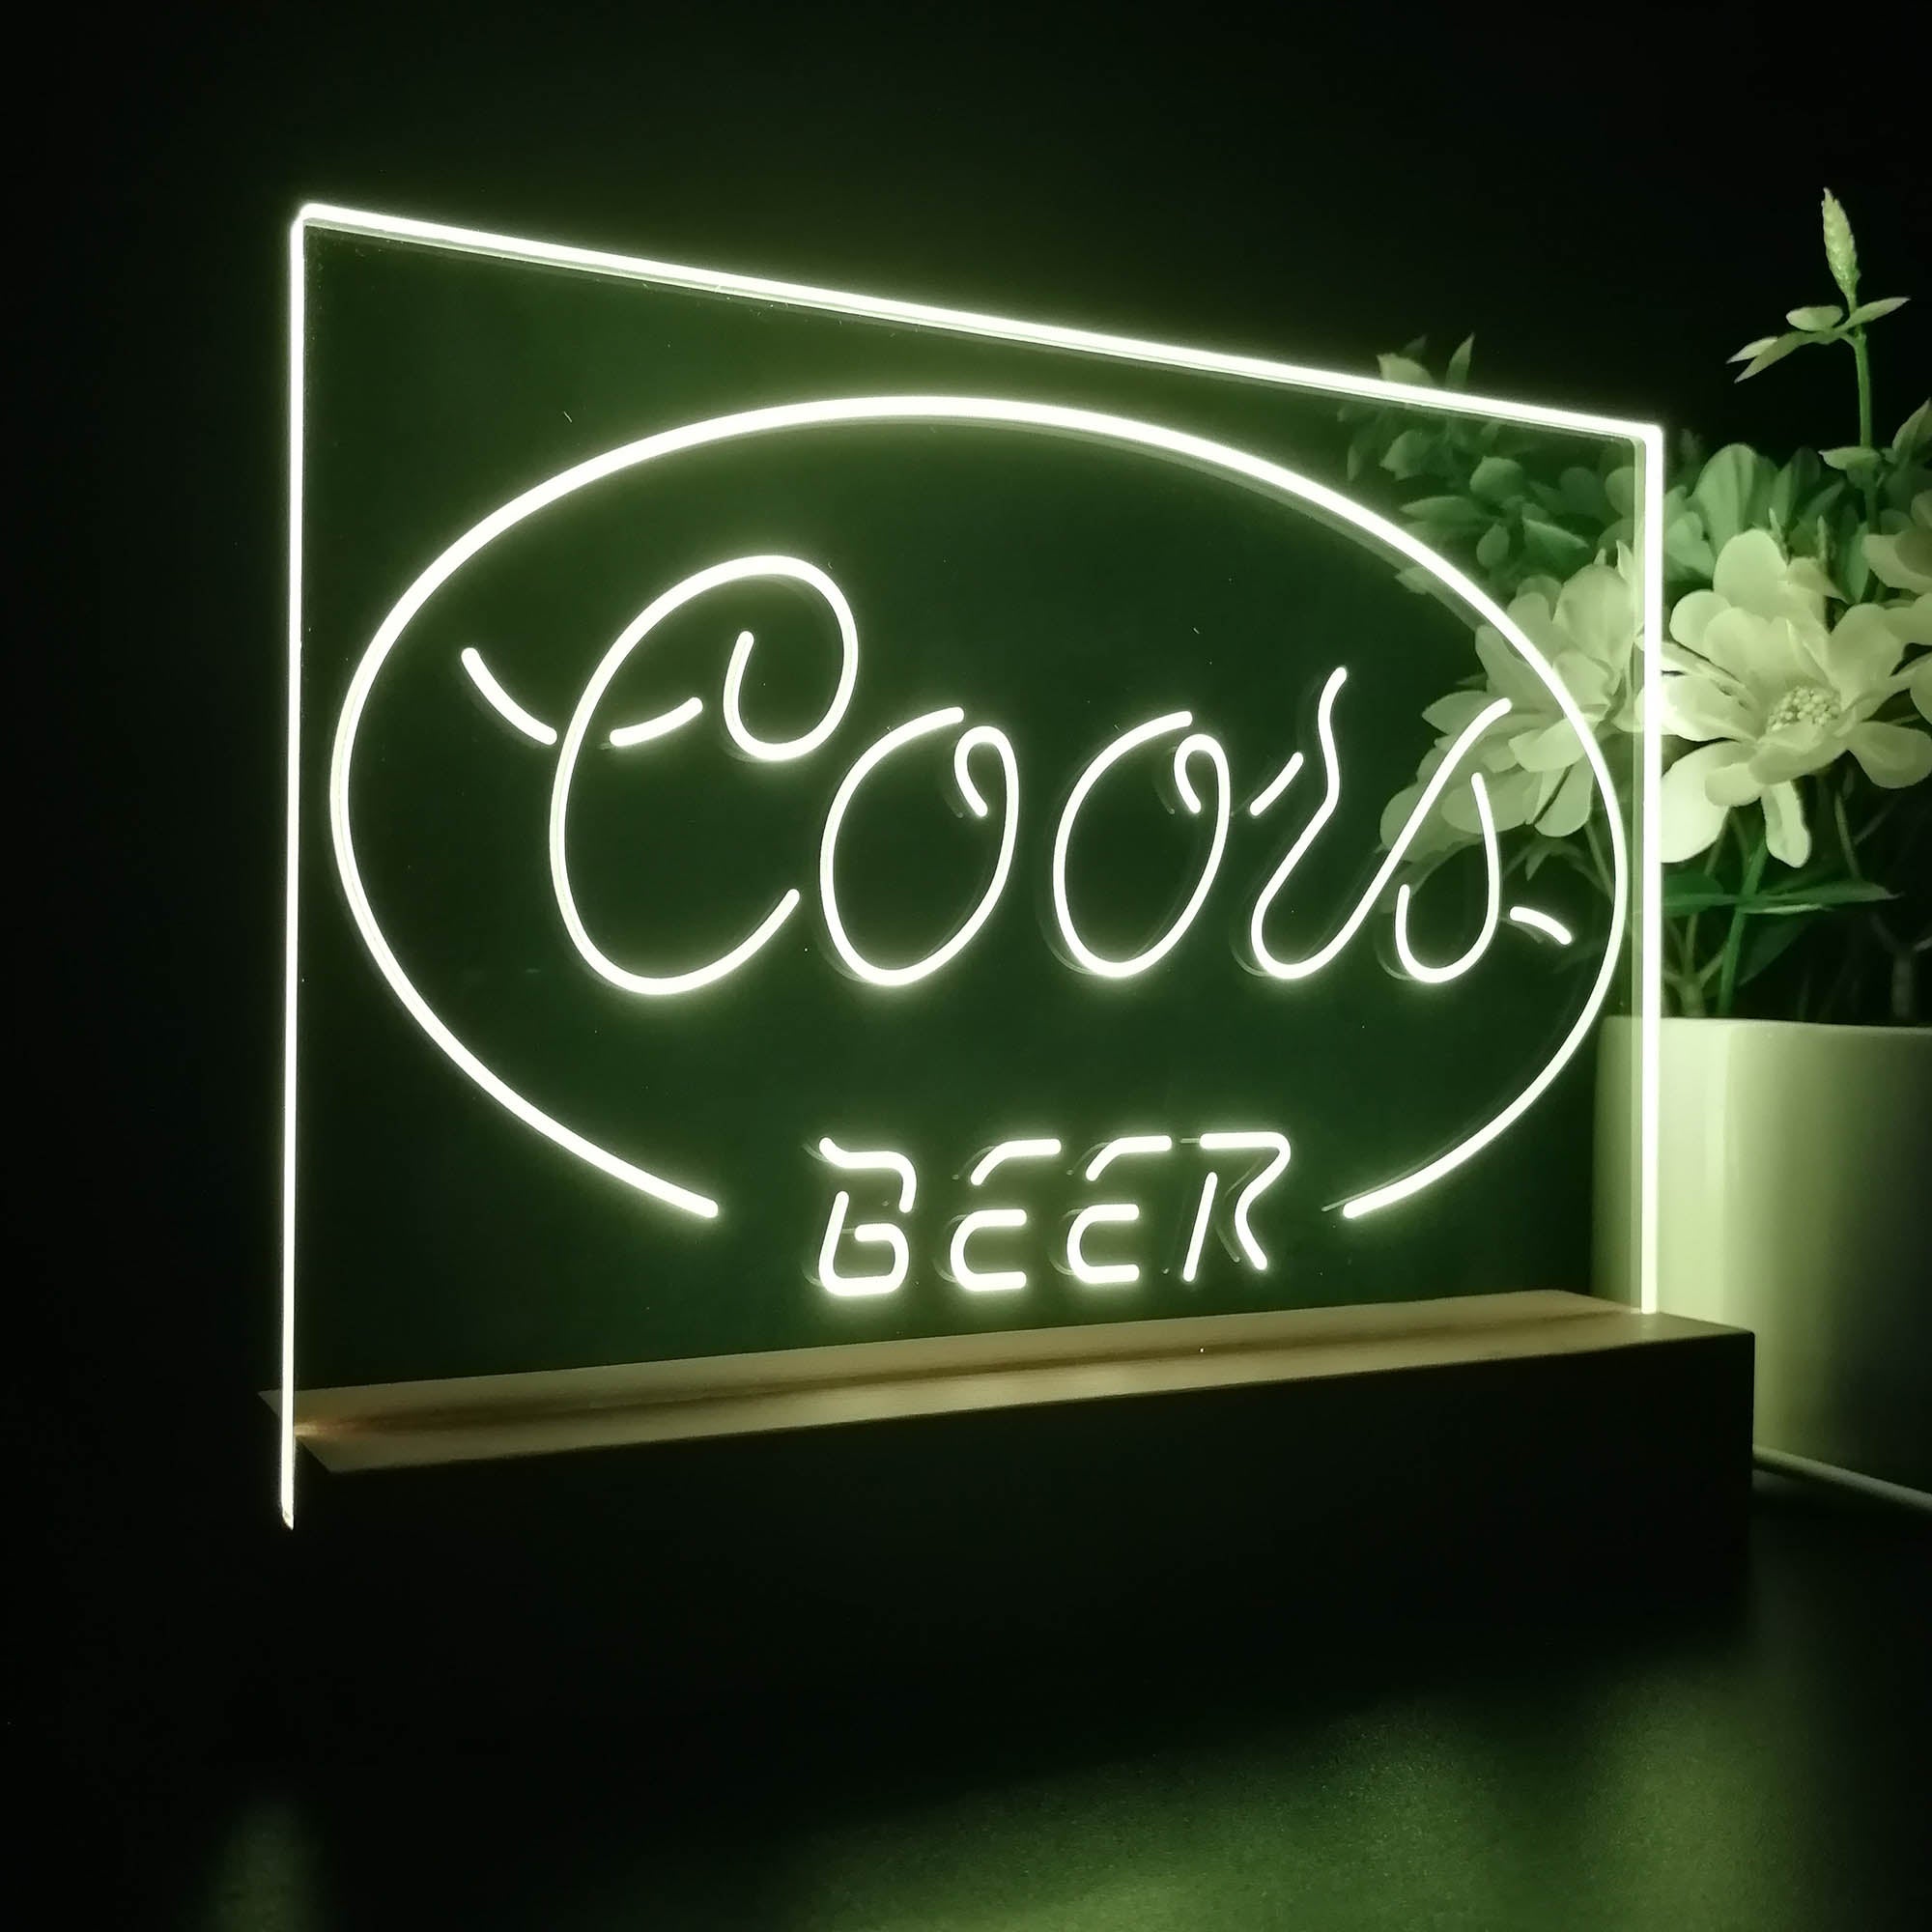 Coors Beer Oval Classic Night Light LED Sign